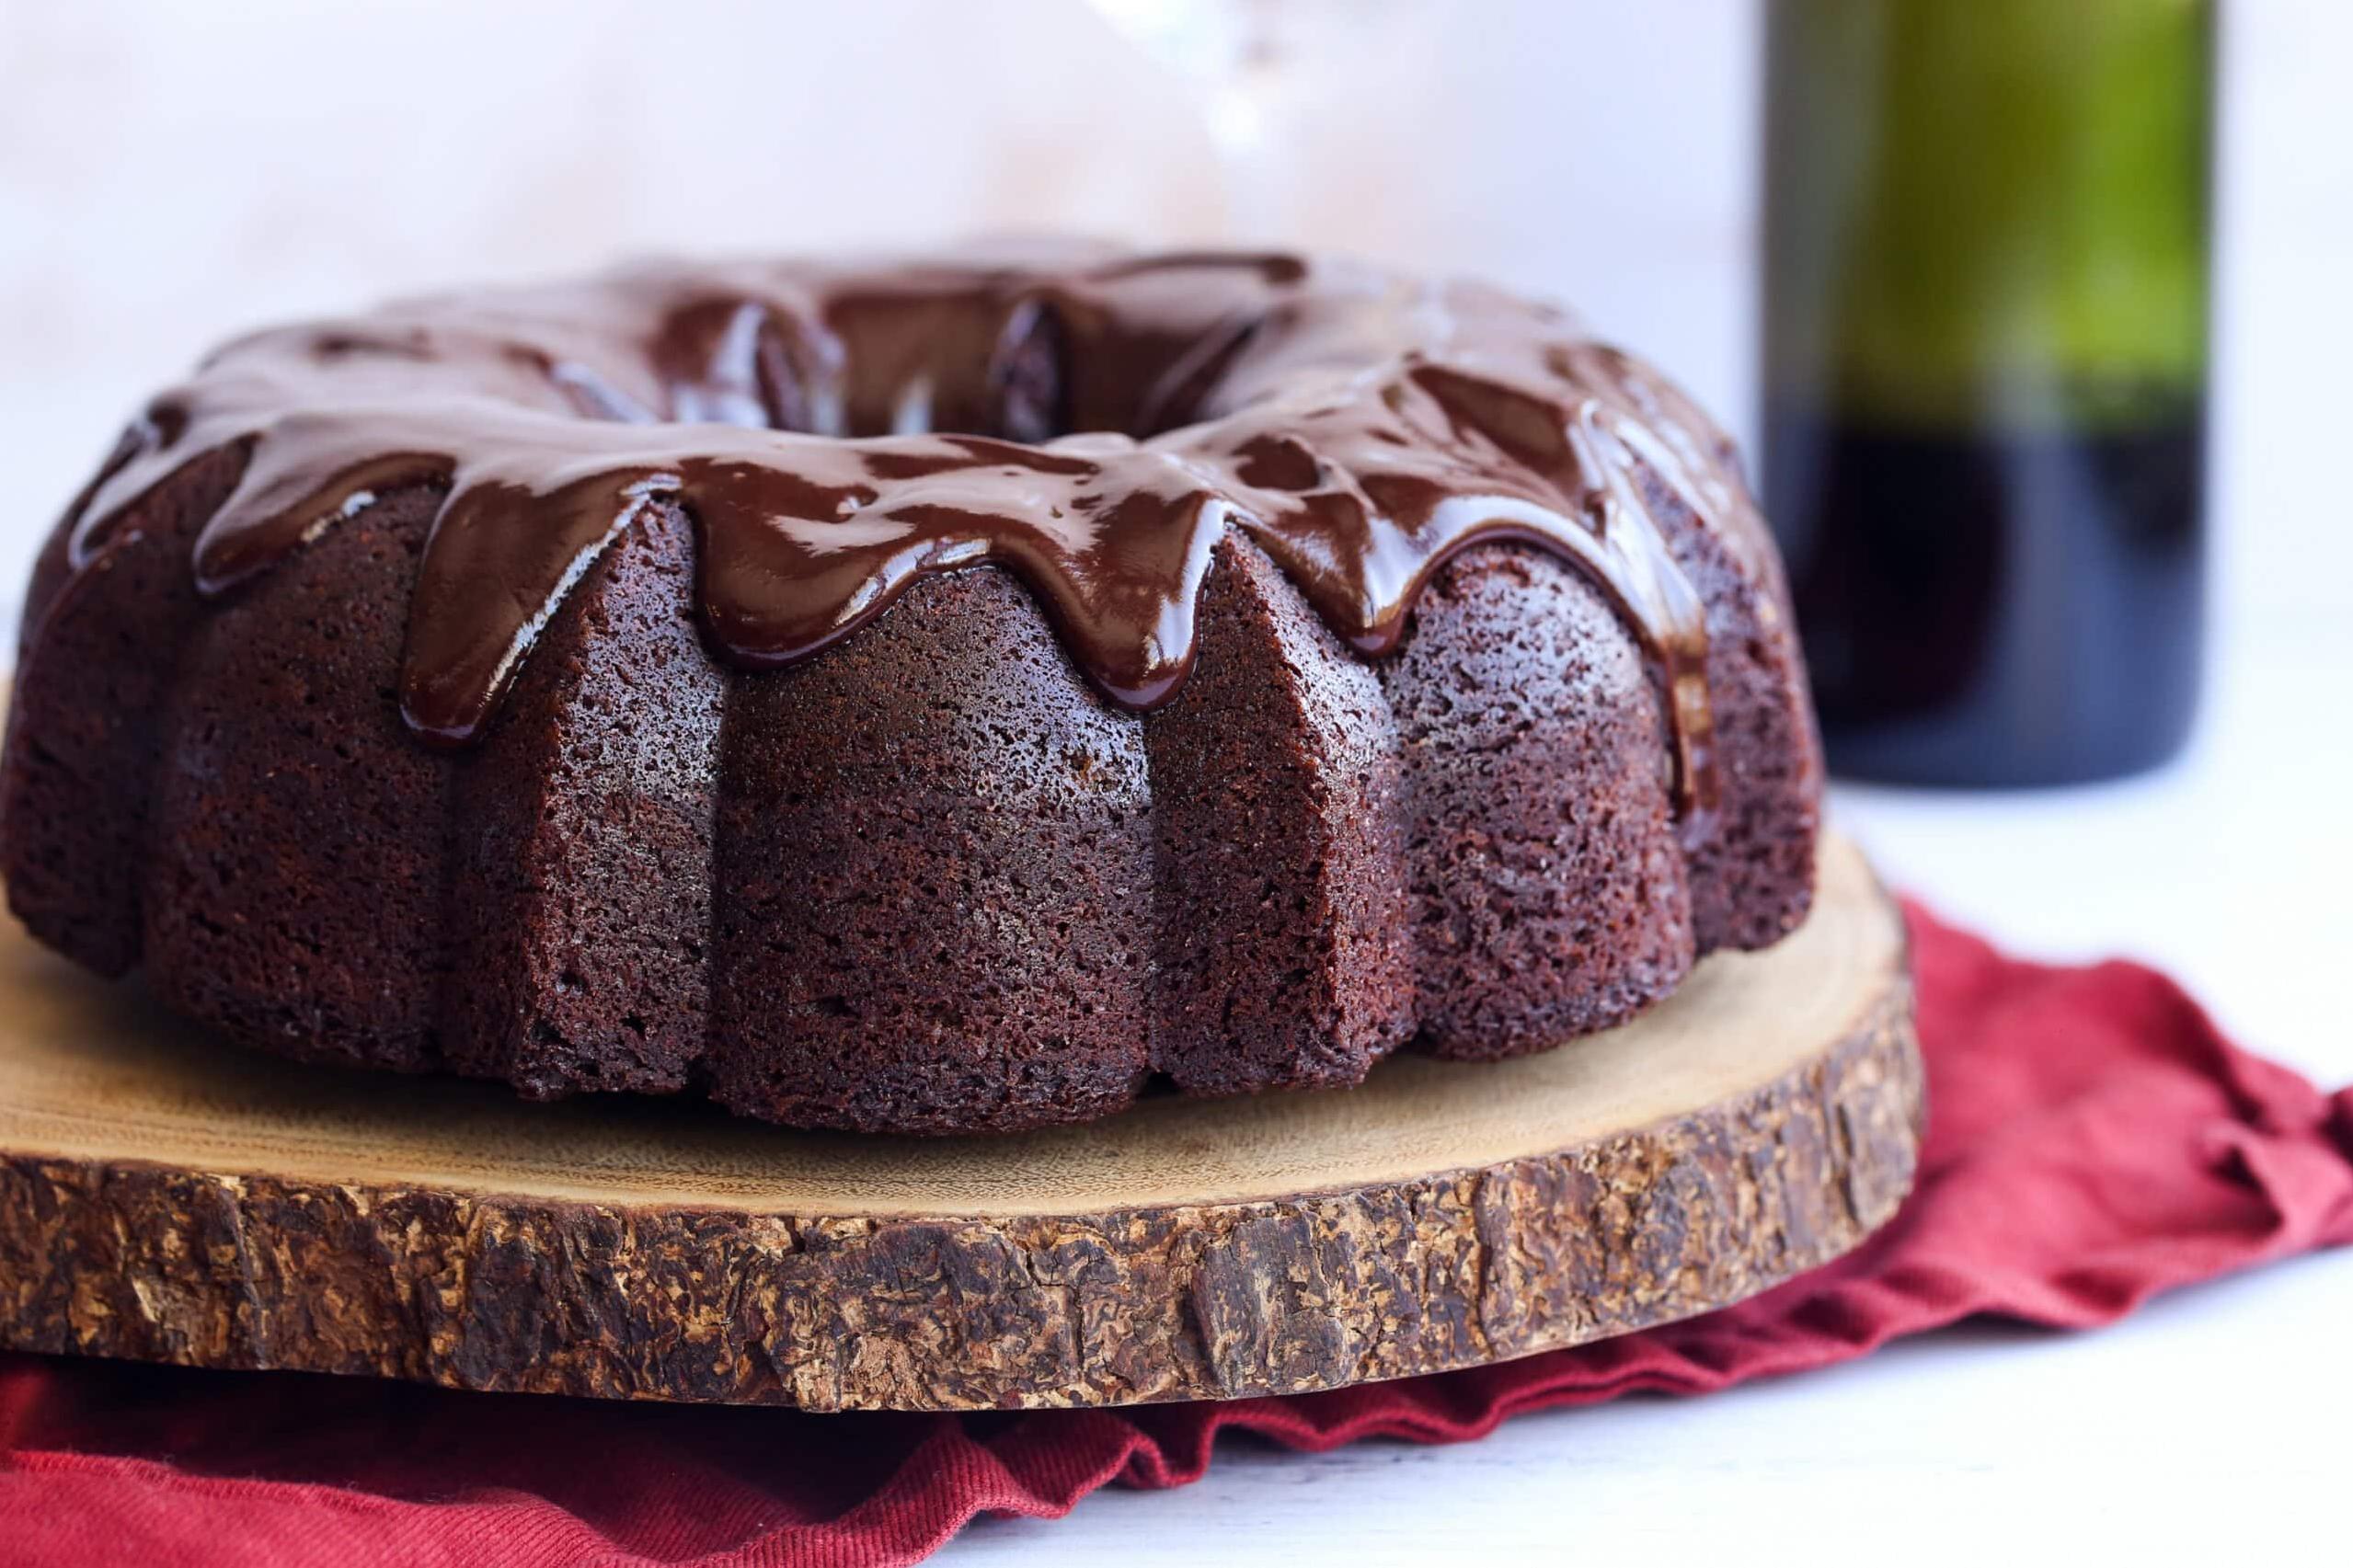  One bite of this decadent cake and you'll think you've died and gone to dessert heaven.